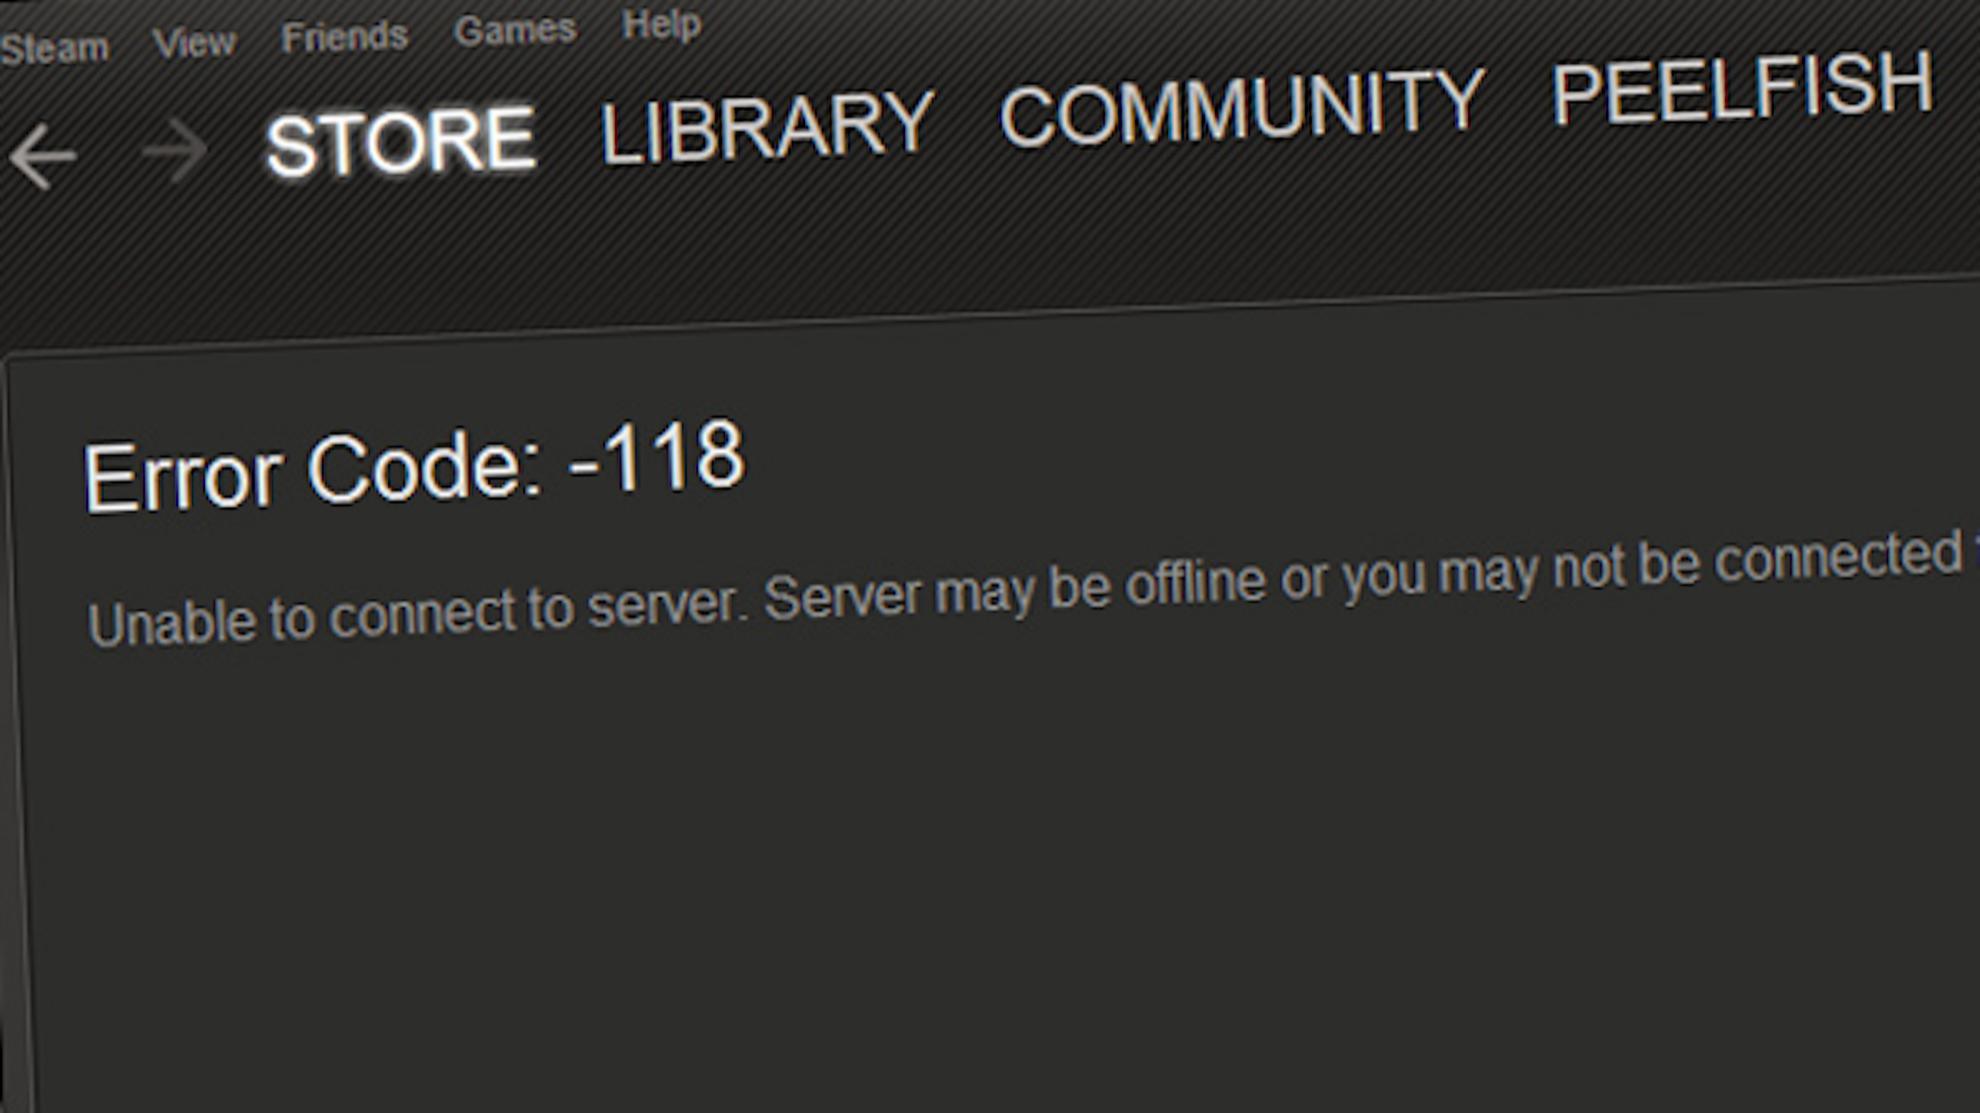 You are currently not logged in to steam фото 83